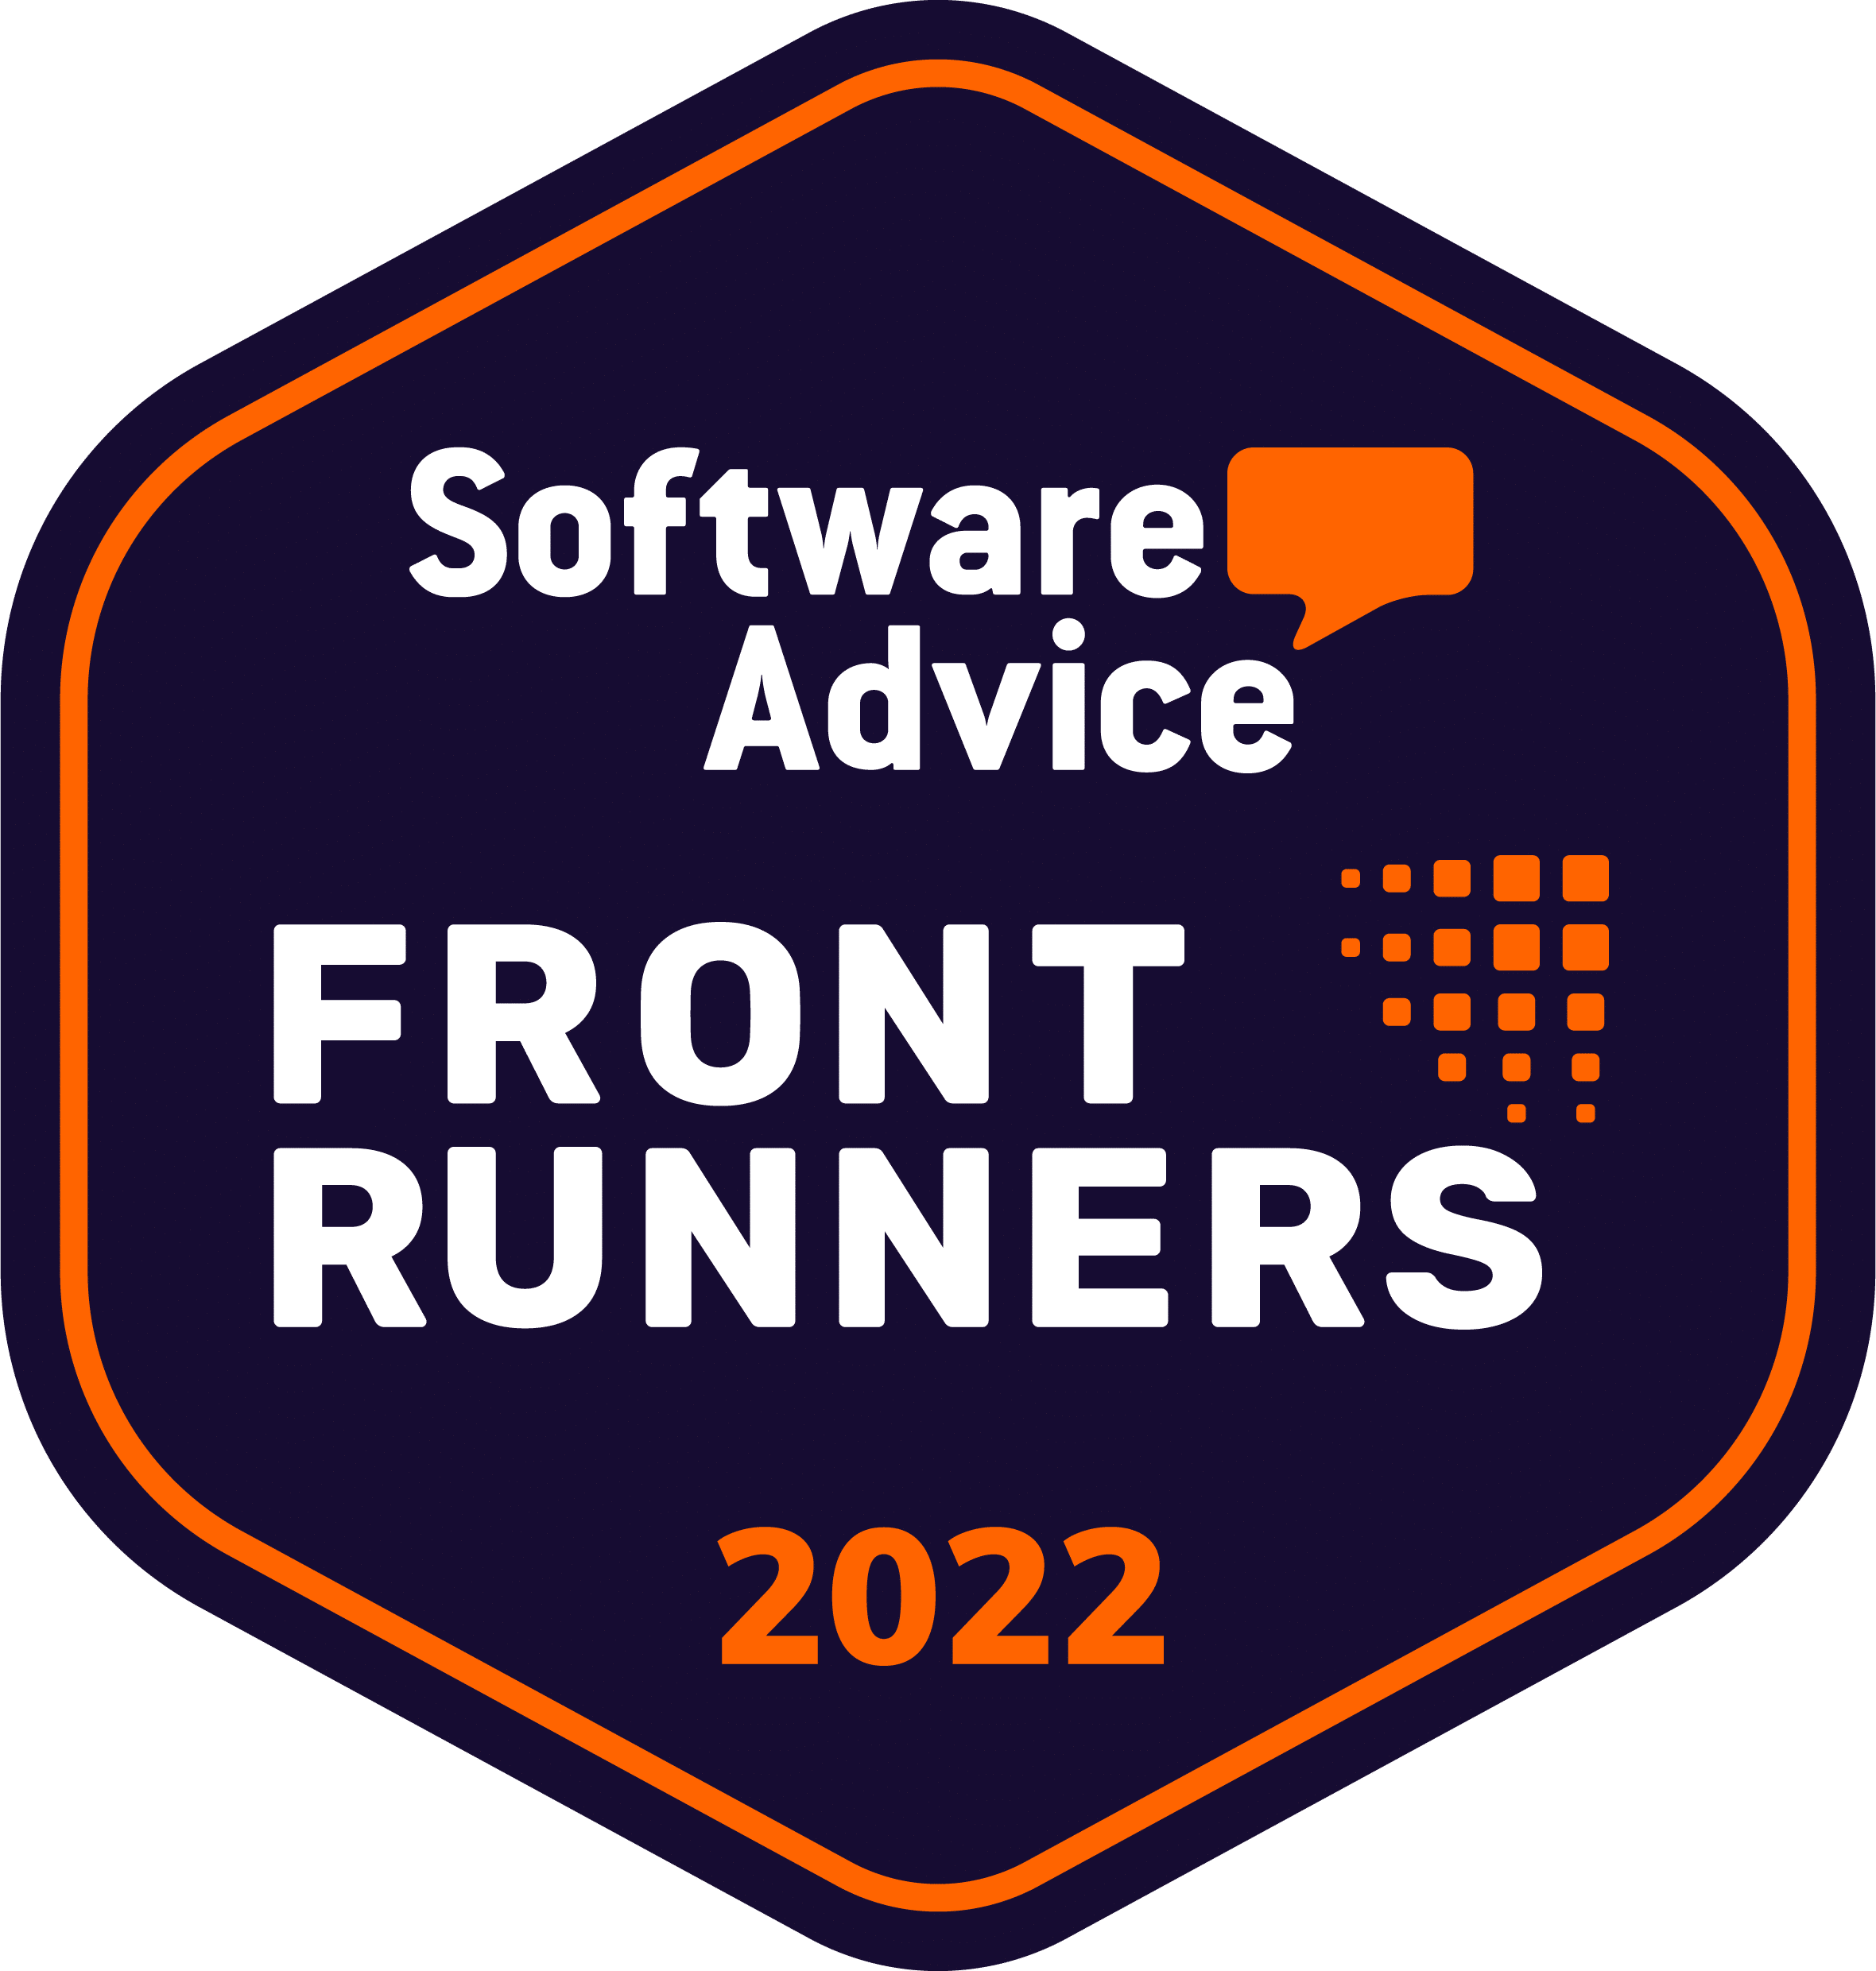 Software Advice Front Runners Signiflow